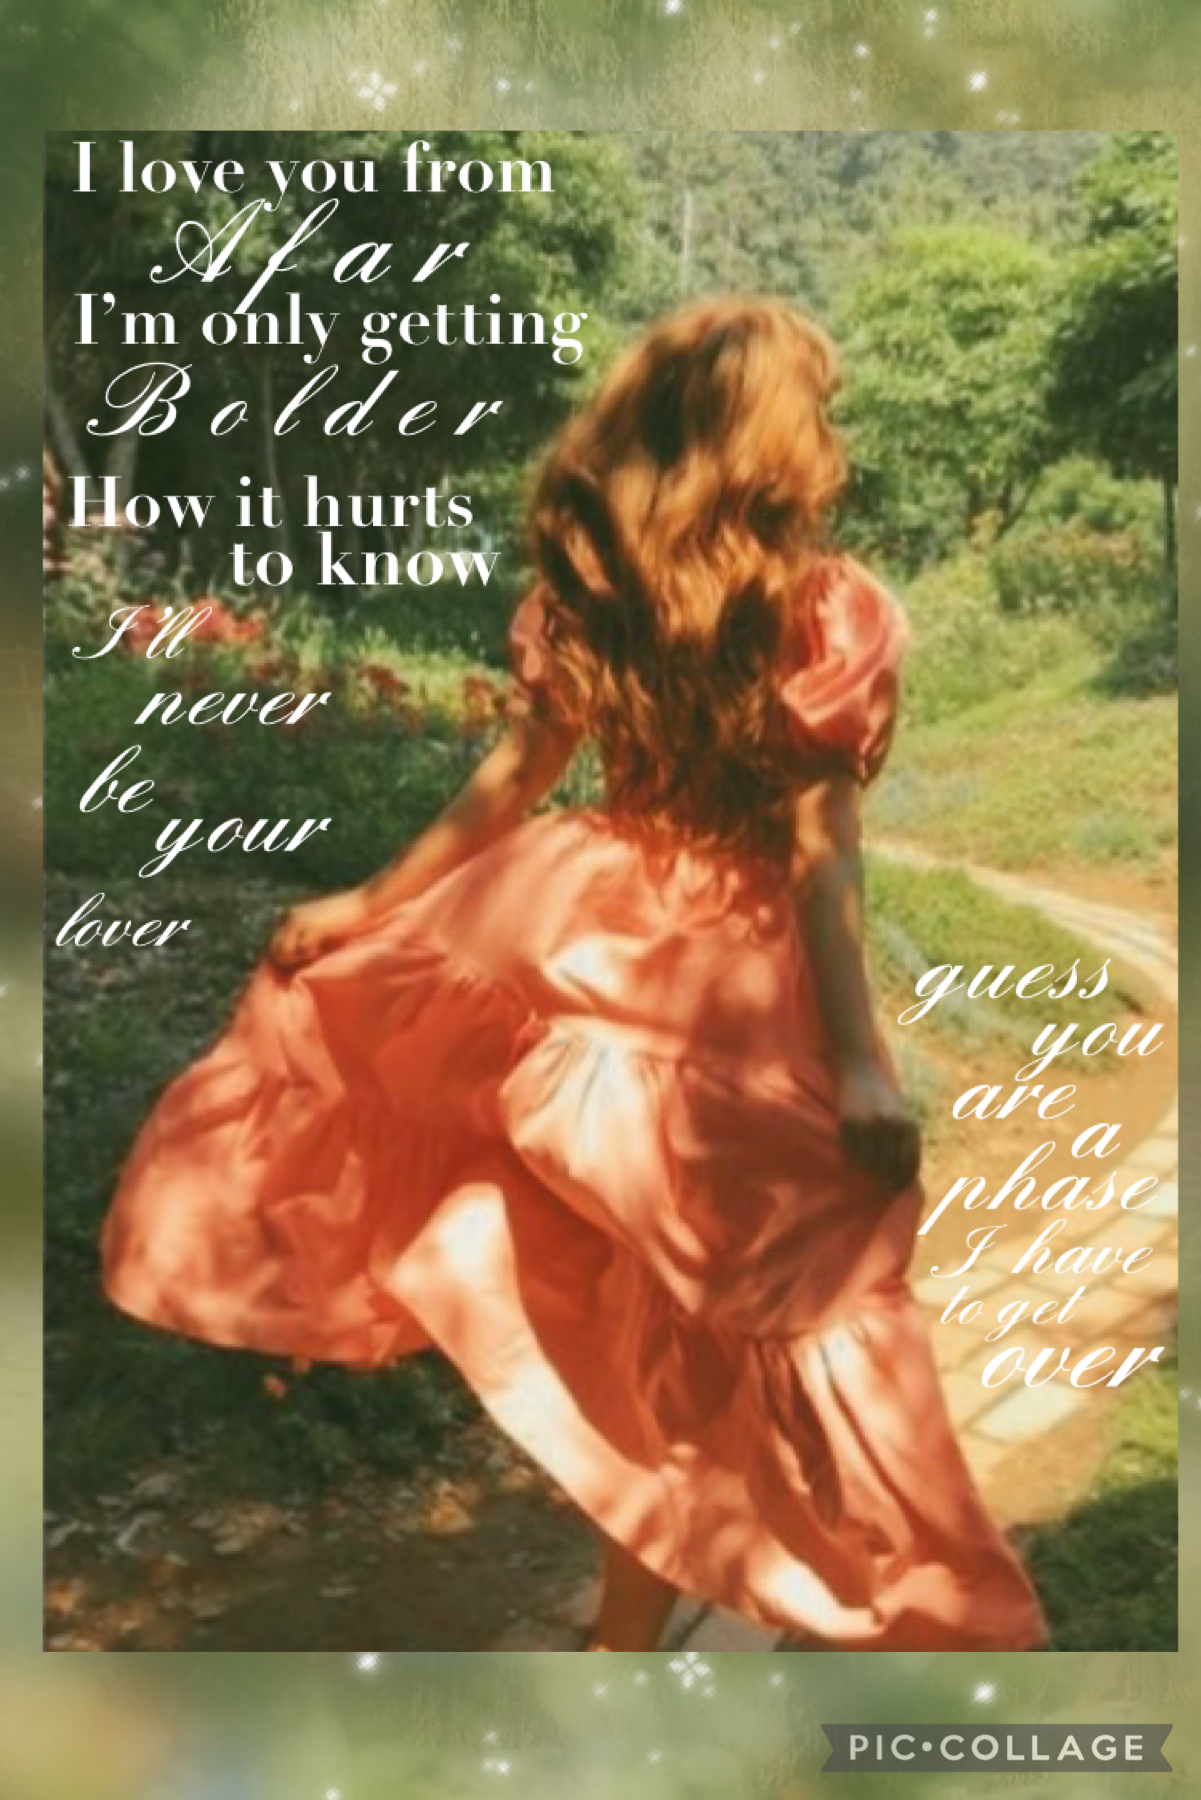 Exhibit A: my failed cottagecore collage with a quote from my new poem
I really am in love with the poem but can’t figure out how I want to incorporate it into a collage and how to present it as a whole 